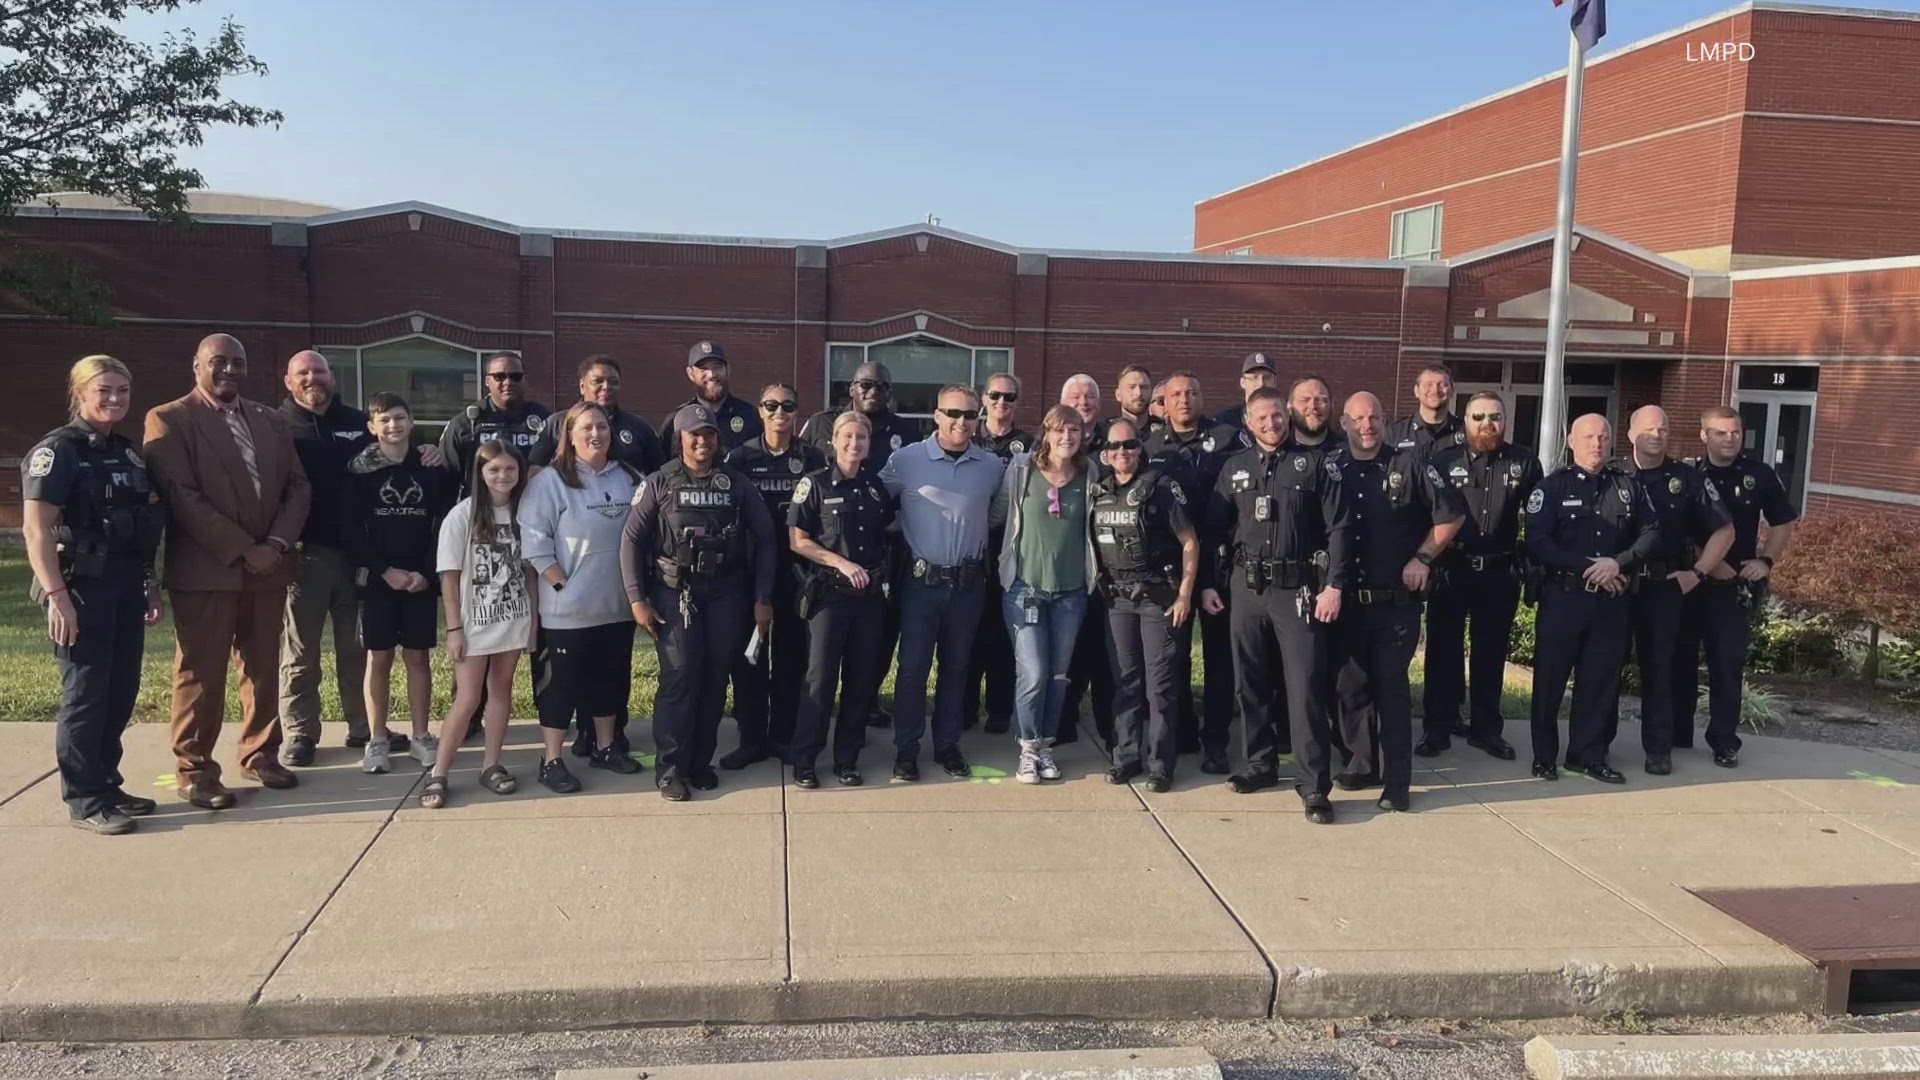 Officers from LMPD's first division lined the entrance to welcome students, fallen Officer Zachary Cottingim's son Riley, who had his first day of kindergarten.